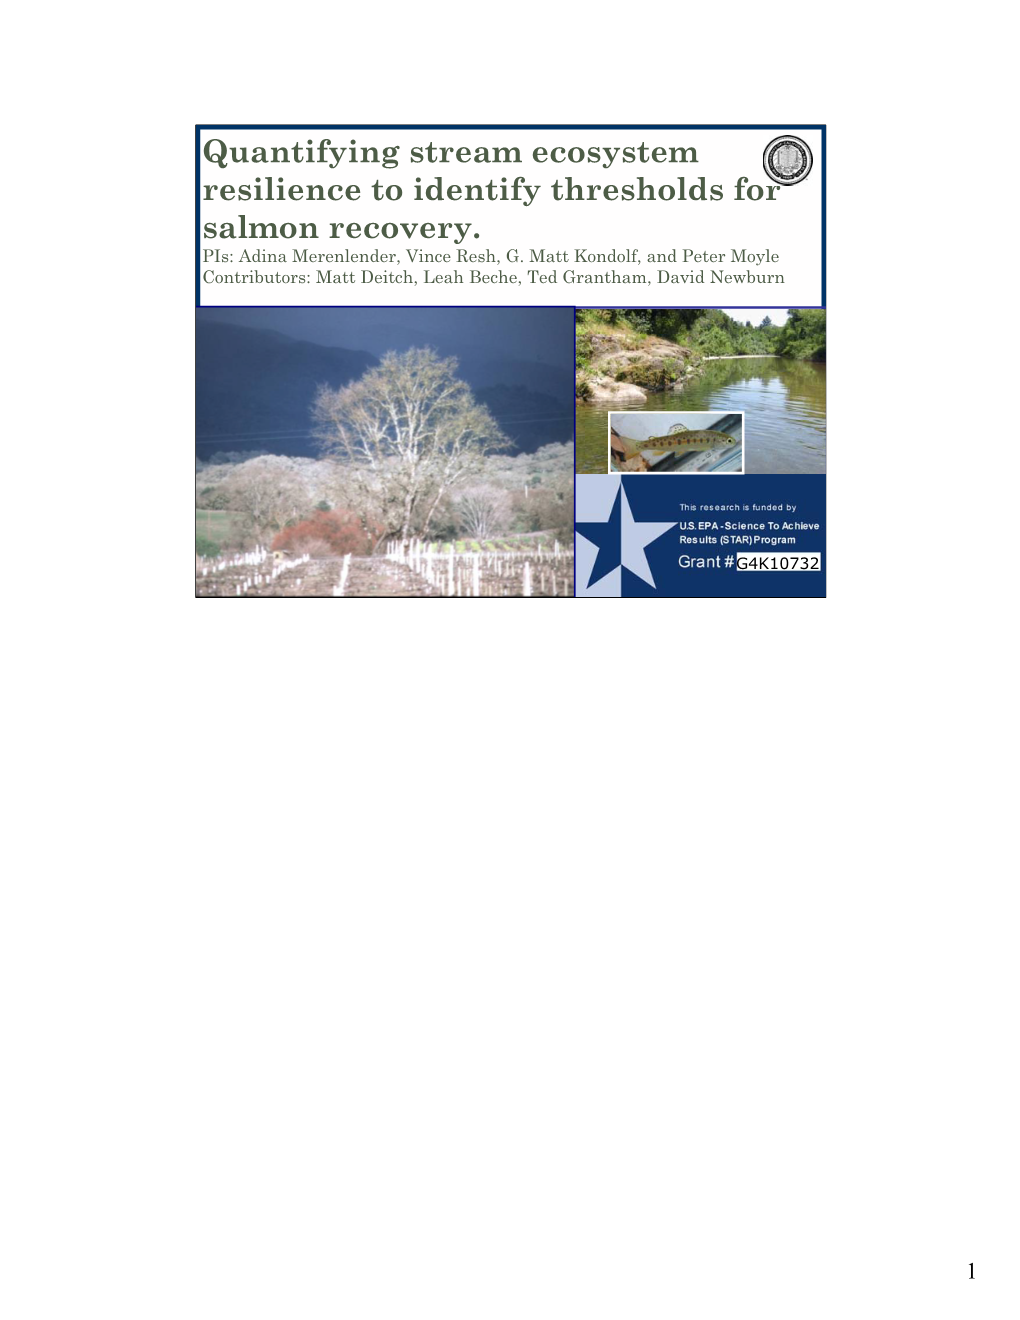 Quantifying Stream Ecosystem Resilience to Identify Thresholds for Salmon Recovery